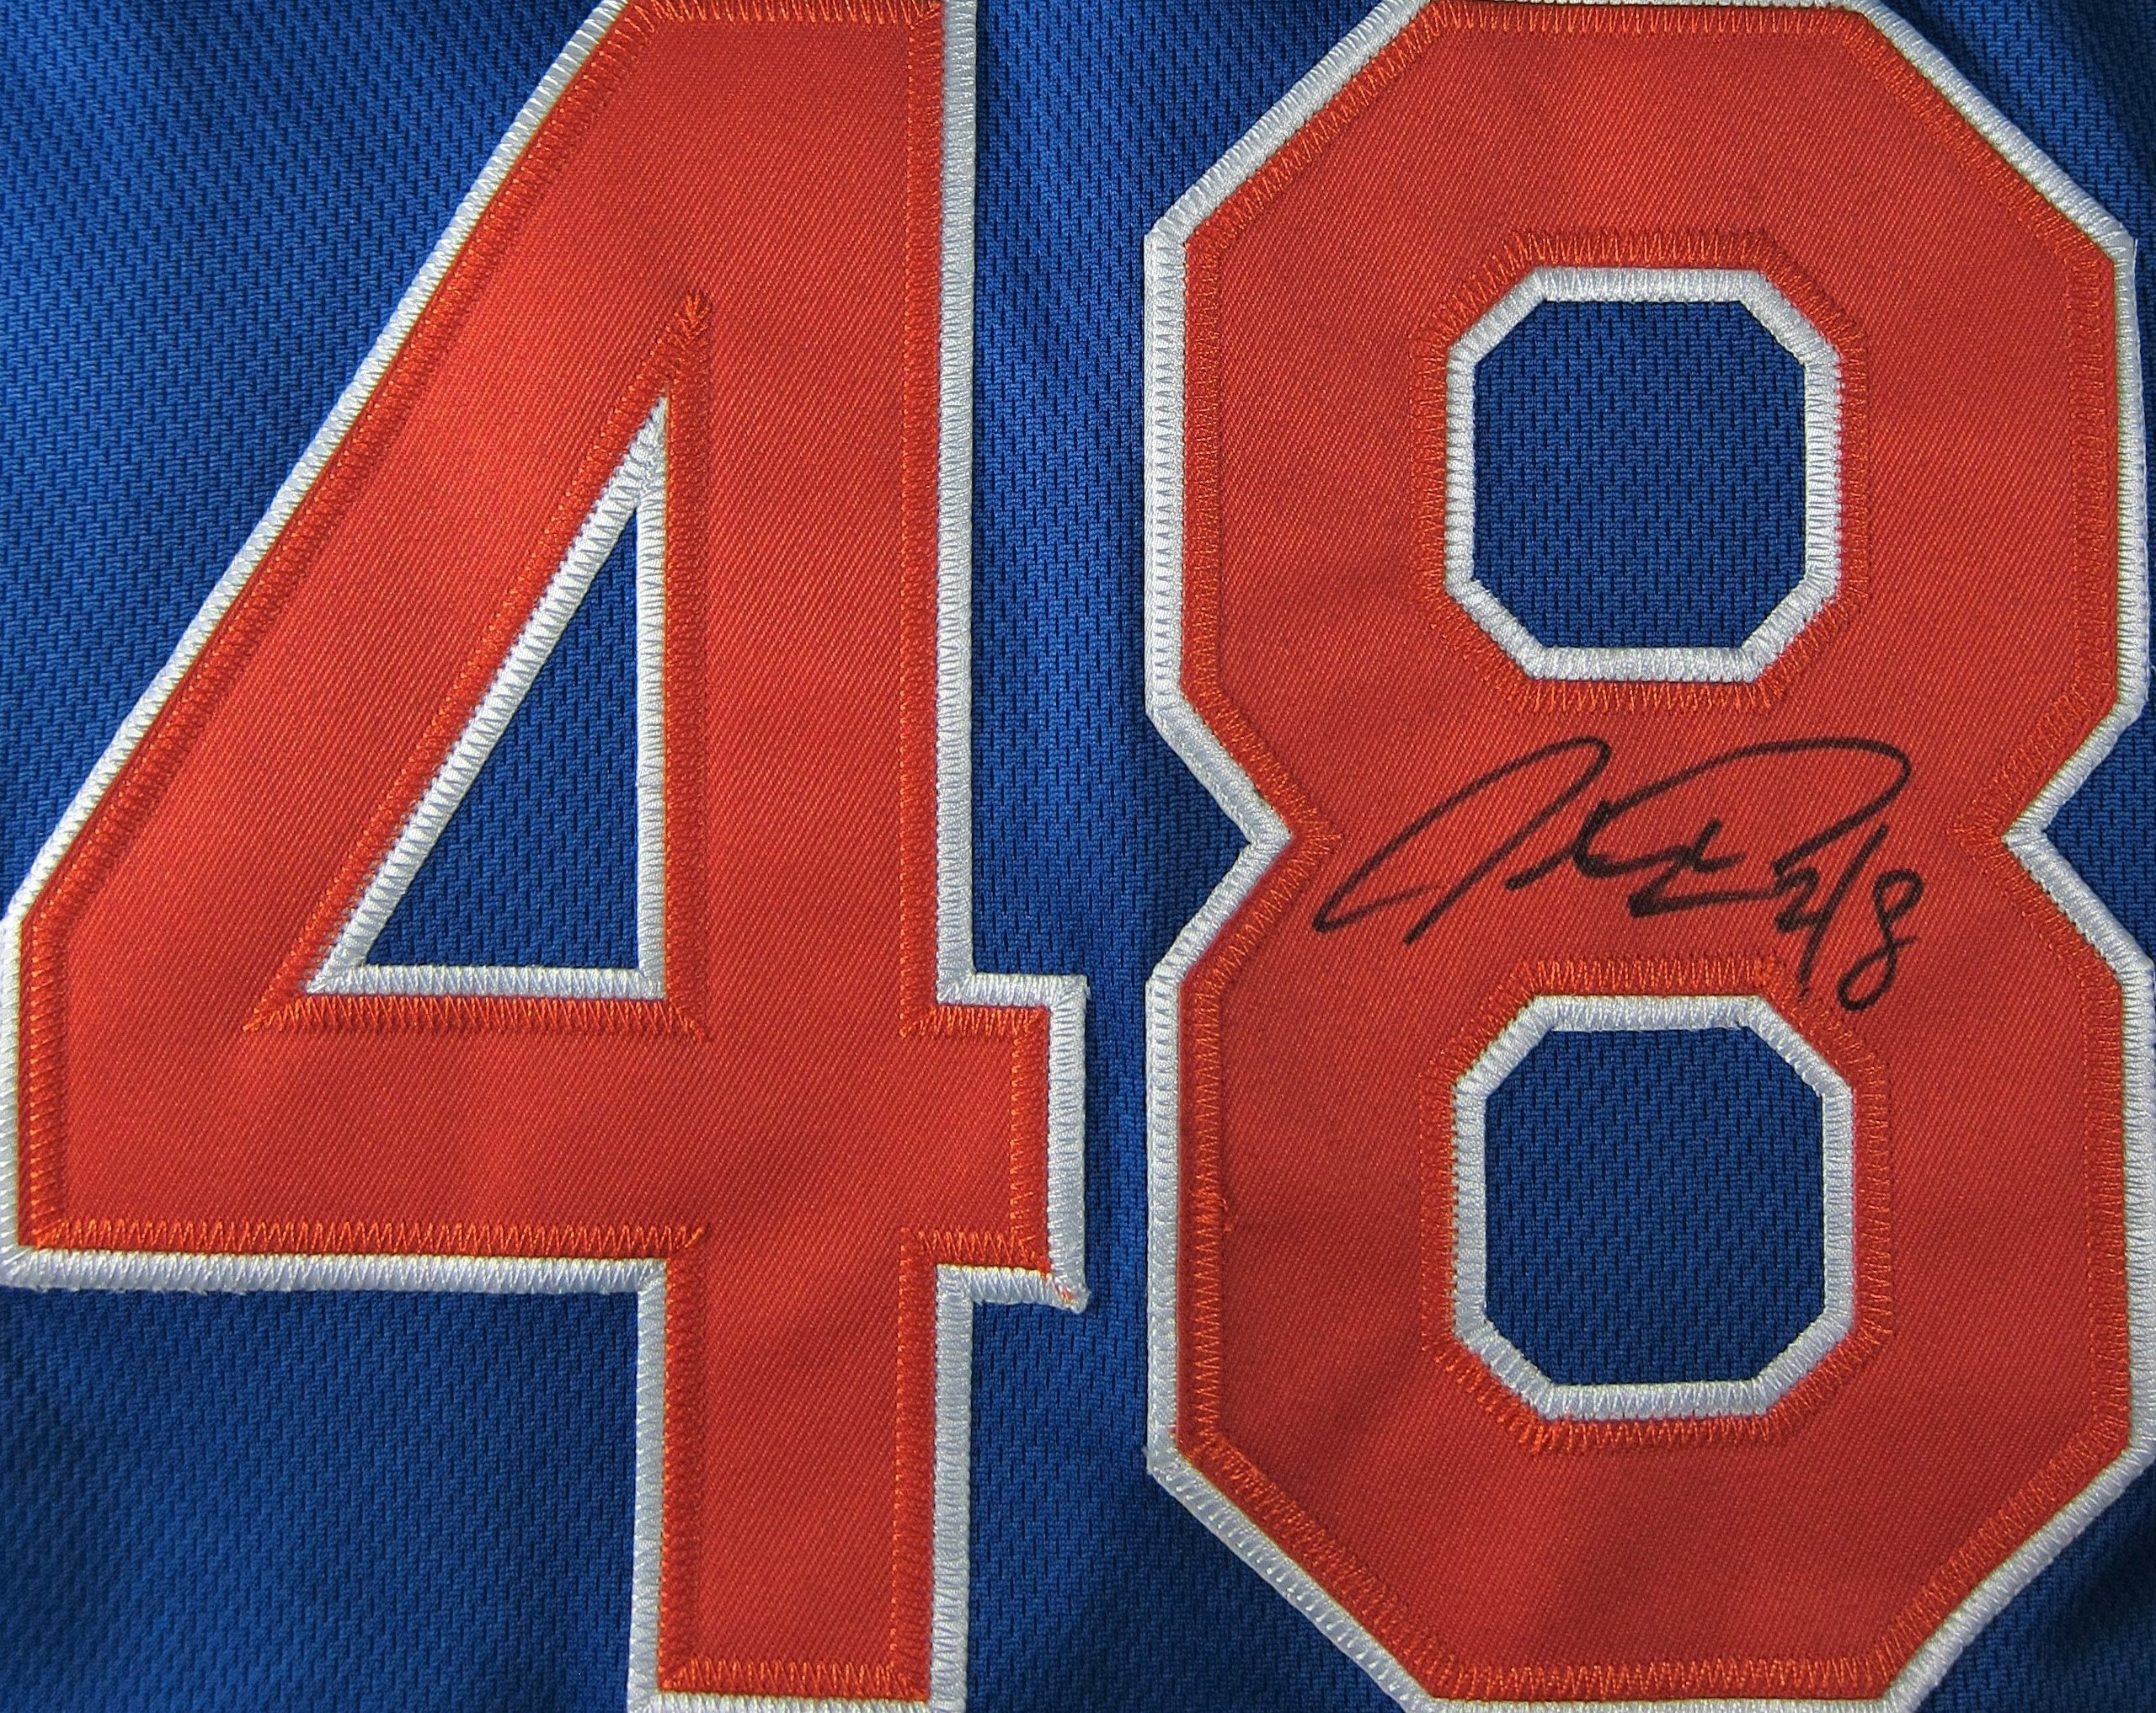 degrom autographed jersey